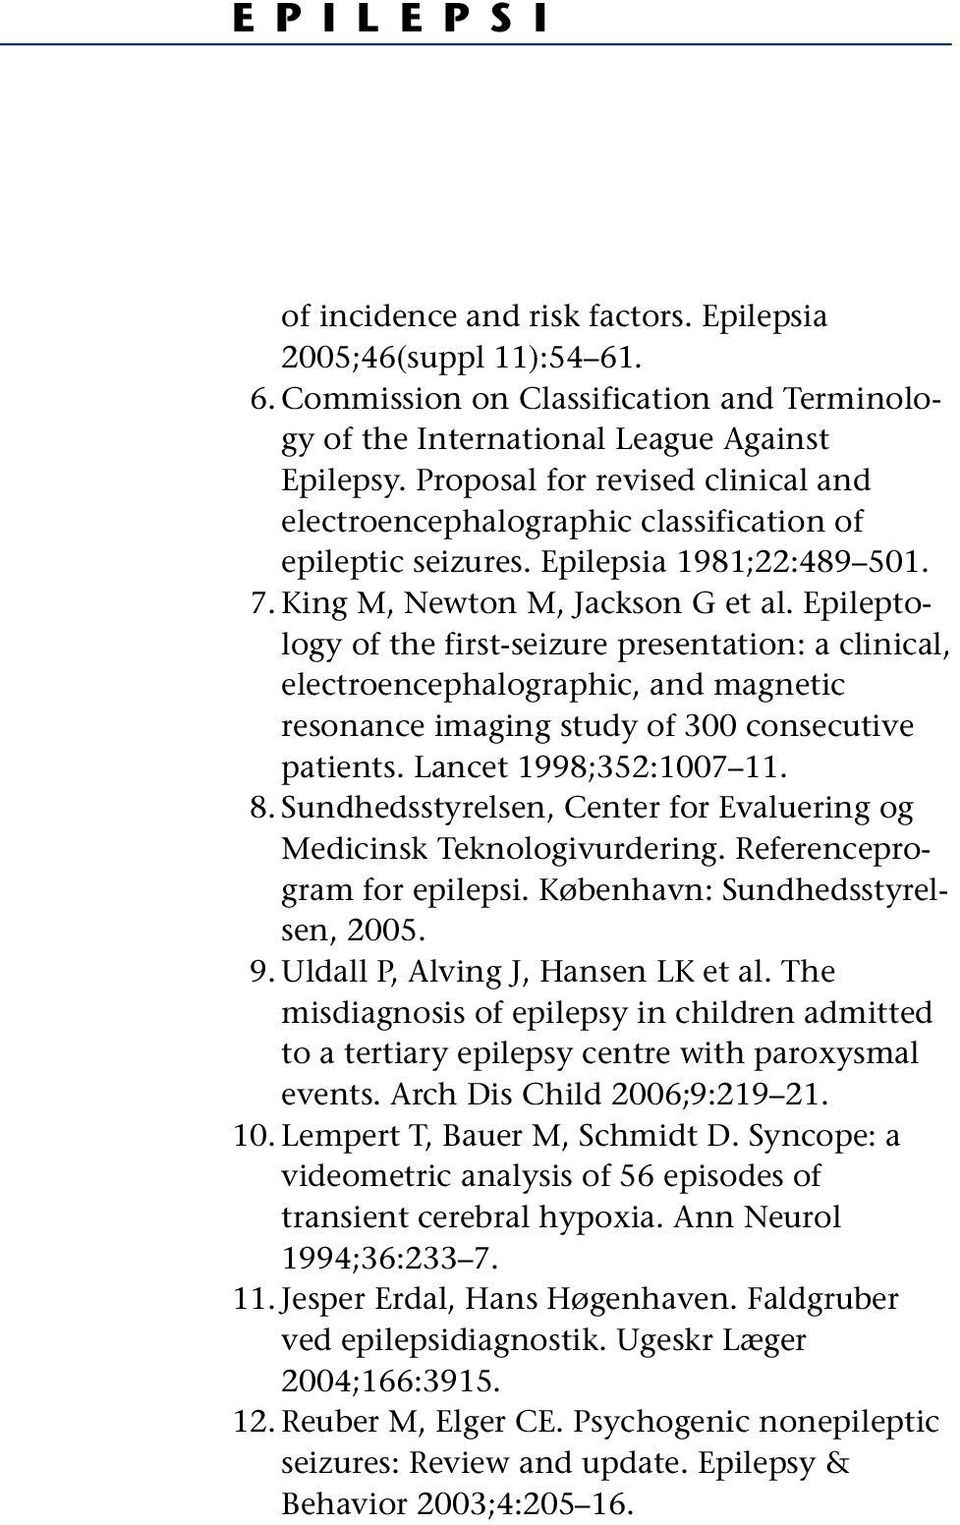 Epileptology of the first-seizure presentation: a clinical, electroencephalographic, and magnetic resonance imaging study of 300 consecutive patients. Lancet 1998;352:1007 11. 8.